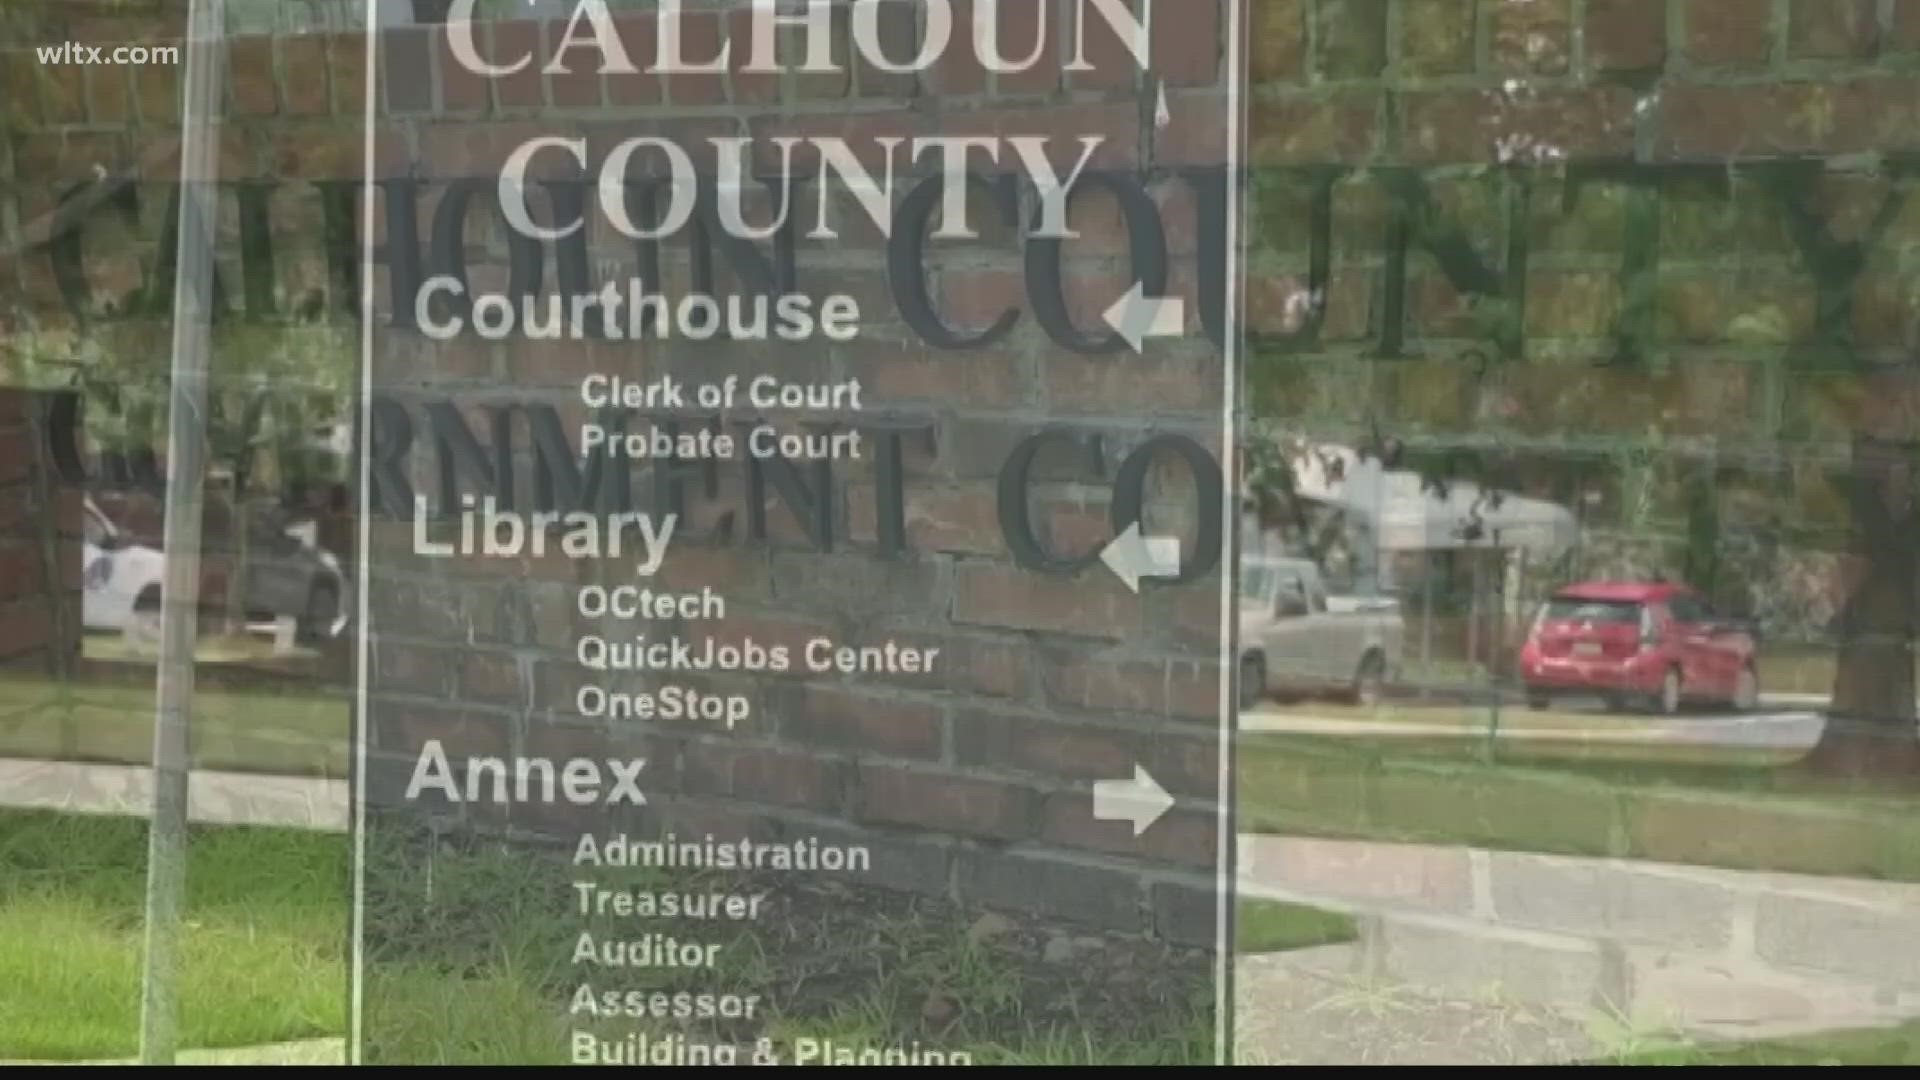 Calhoun county council is looking to streamline how it conducts business.